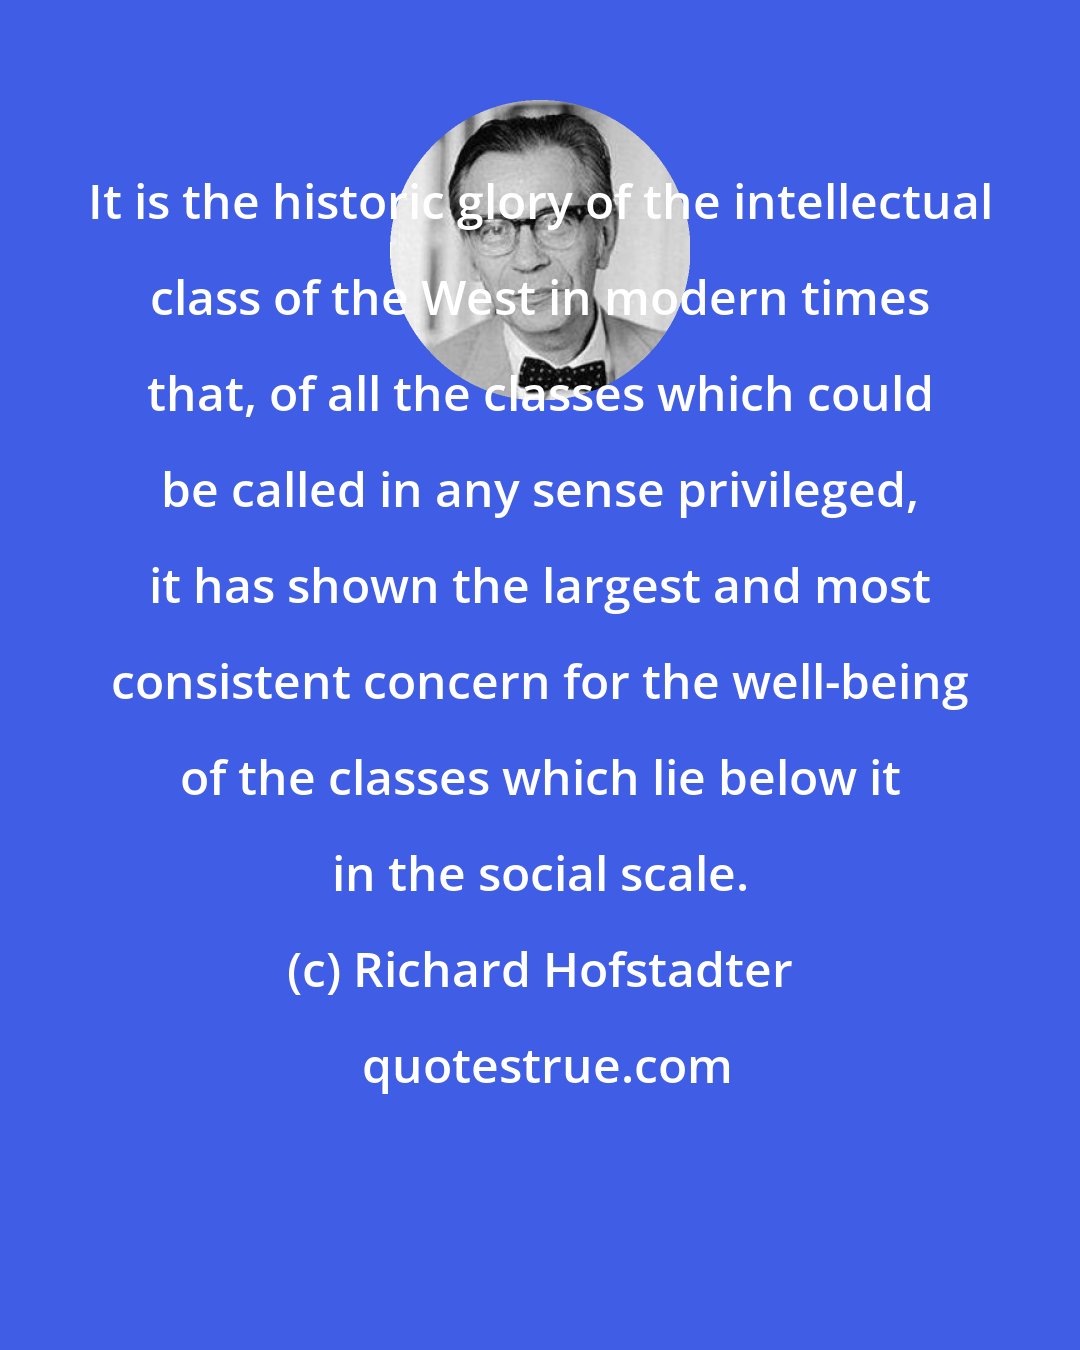 Richard Hofstadter: It is the historic glory of the intellectual class of the West in modern times that, of all the classes which could be called in any sense privileged, it has shown the largest and most consistent concern for the well-being of the classes which lie below it in the social scale.